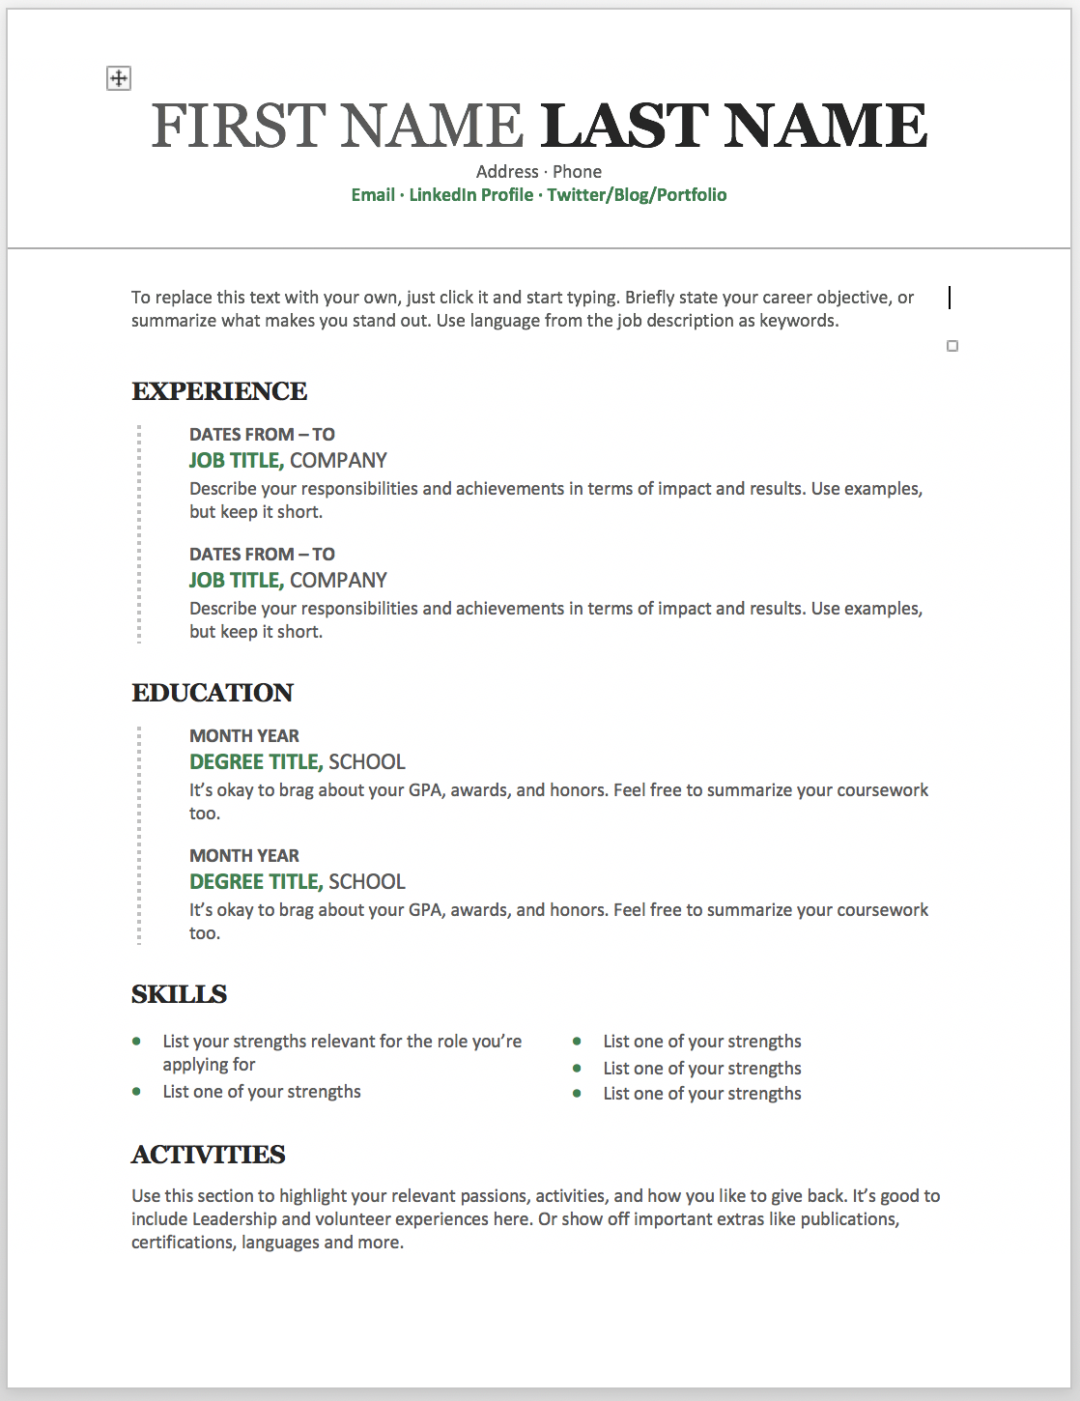 resume template simple free download